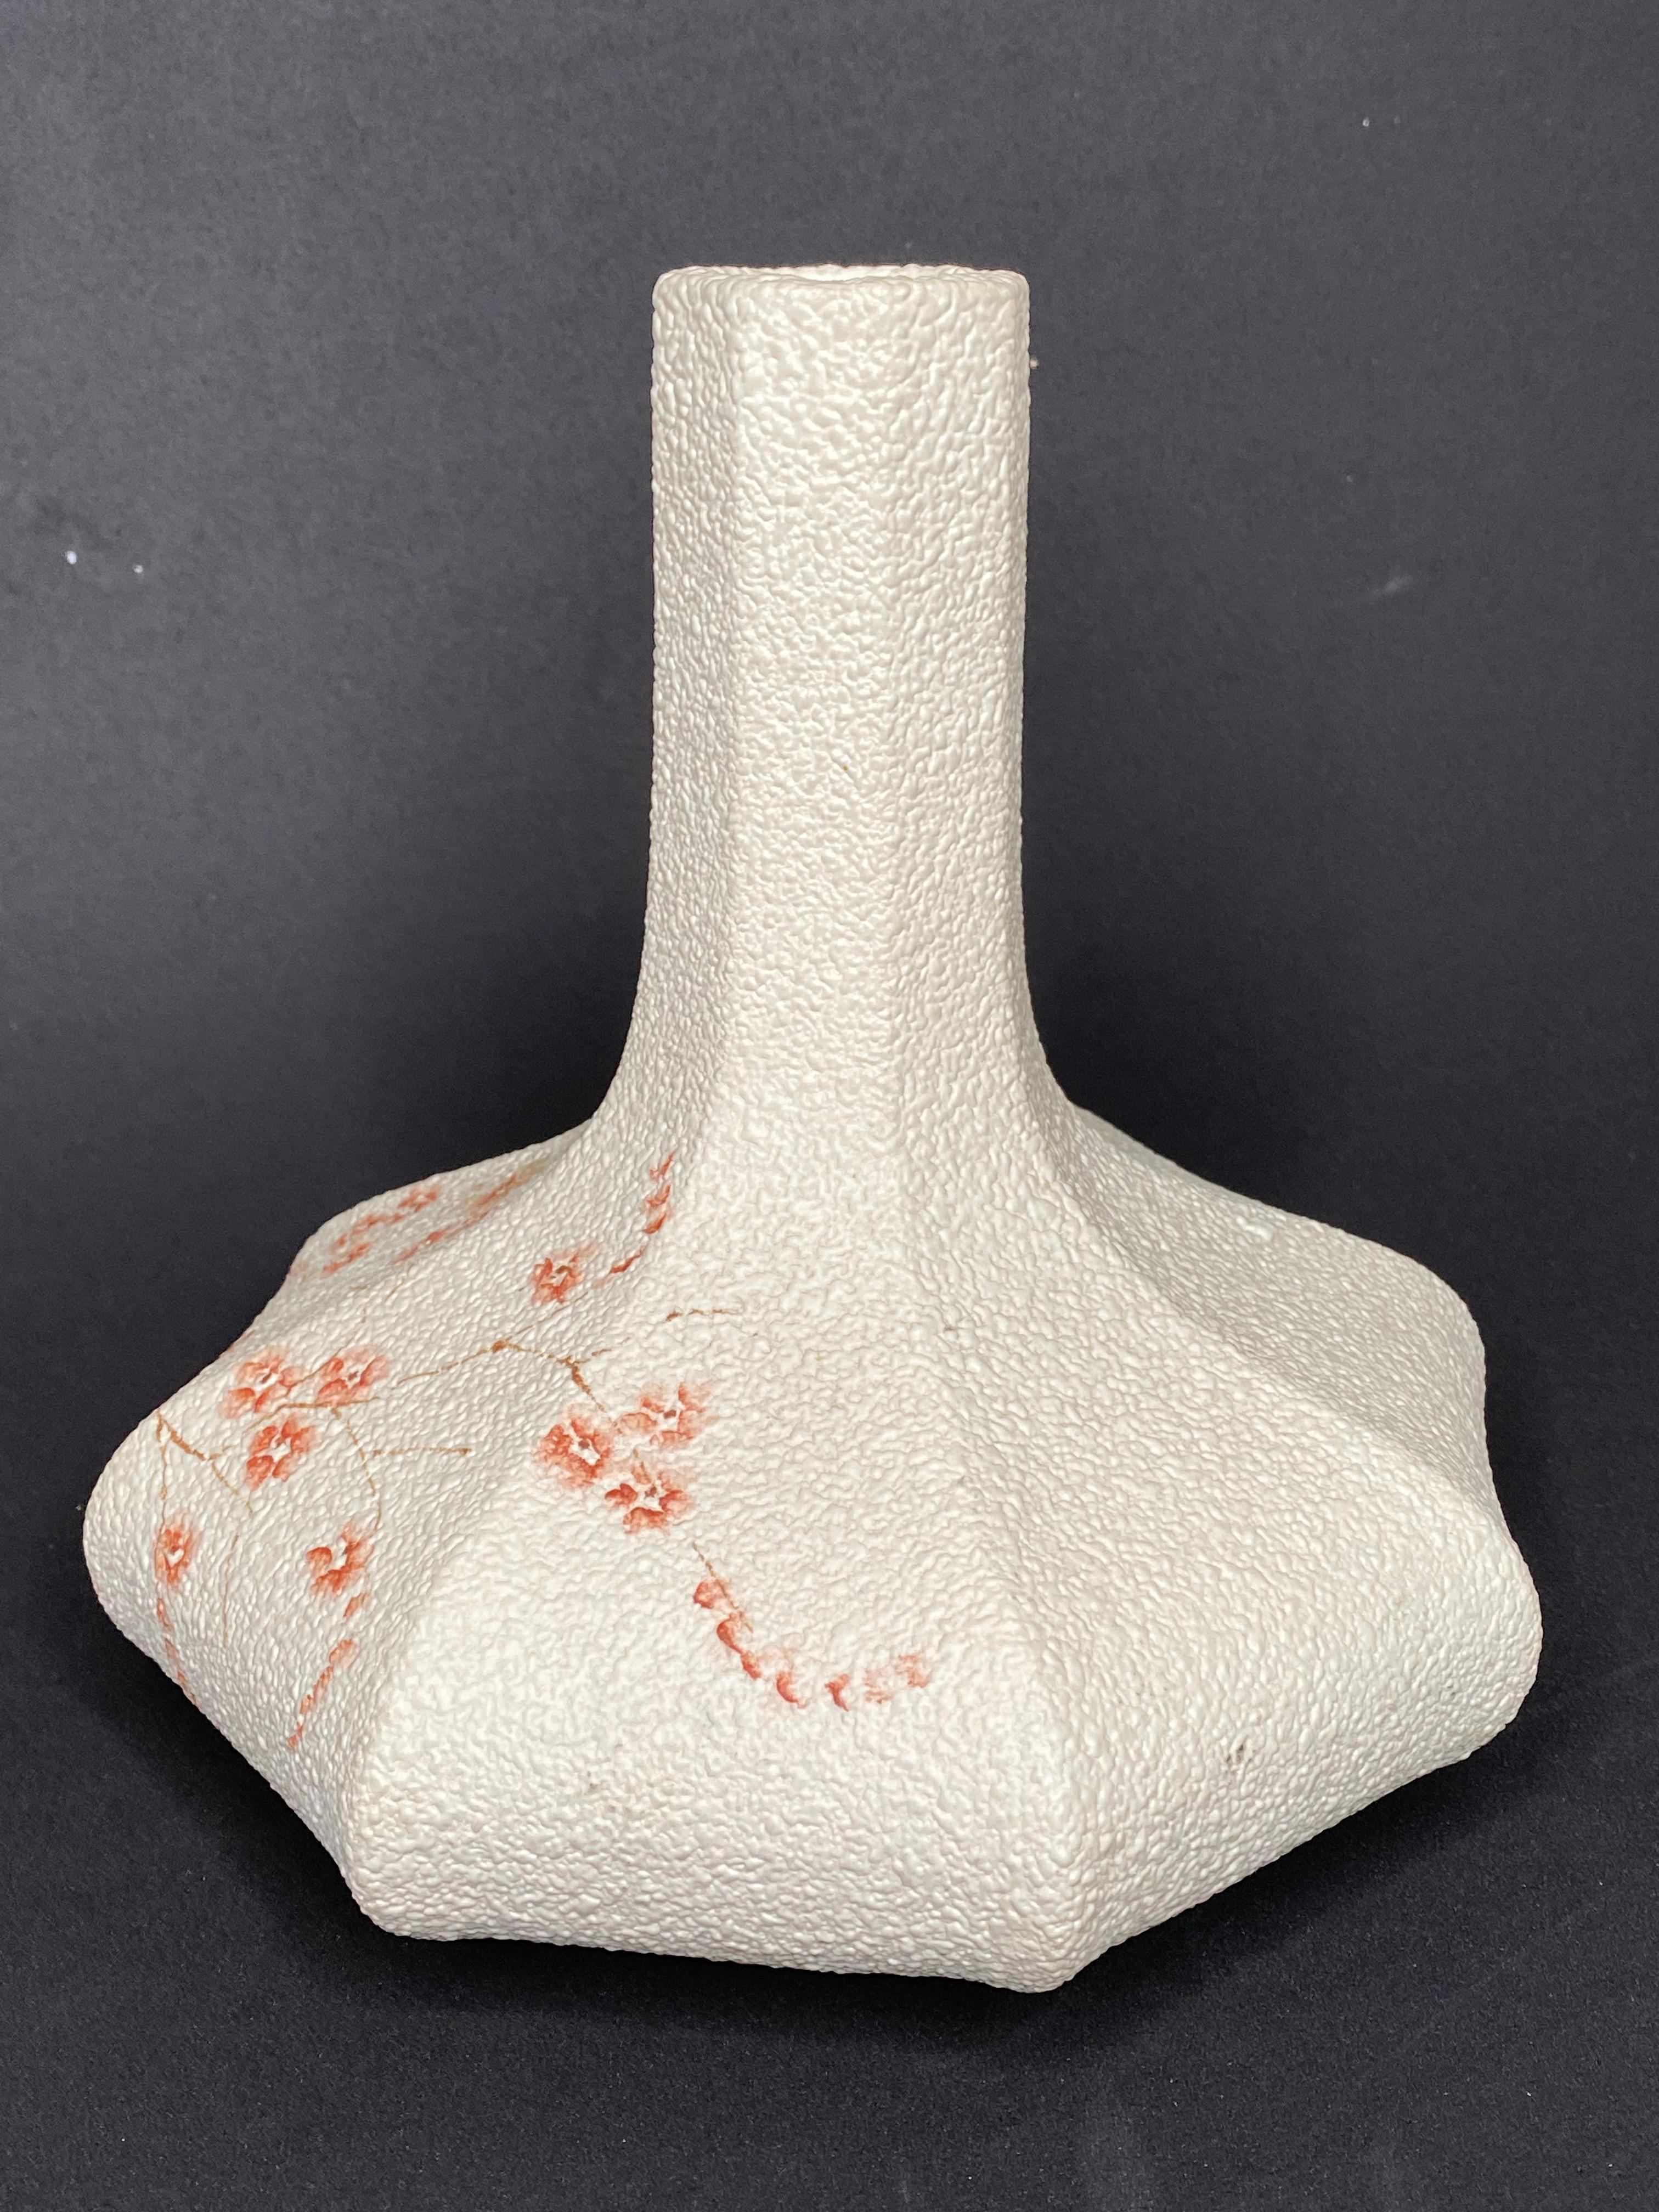 Hand-Crafted Studio Vase Italy Rep, San Marino by Augusto Giulianelli Fat Lava, 1970s For Sale